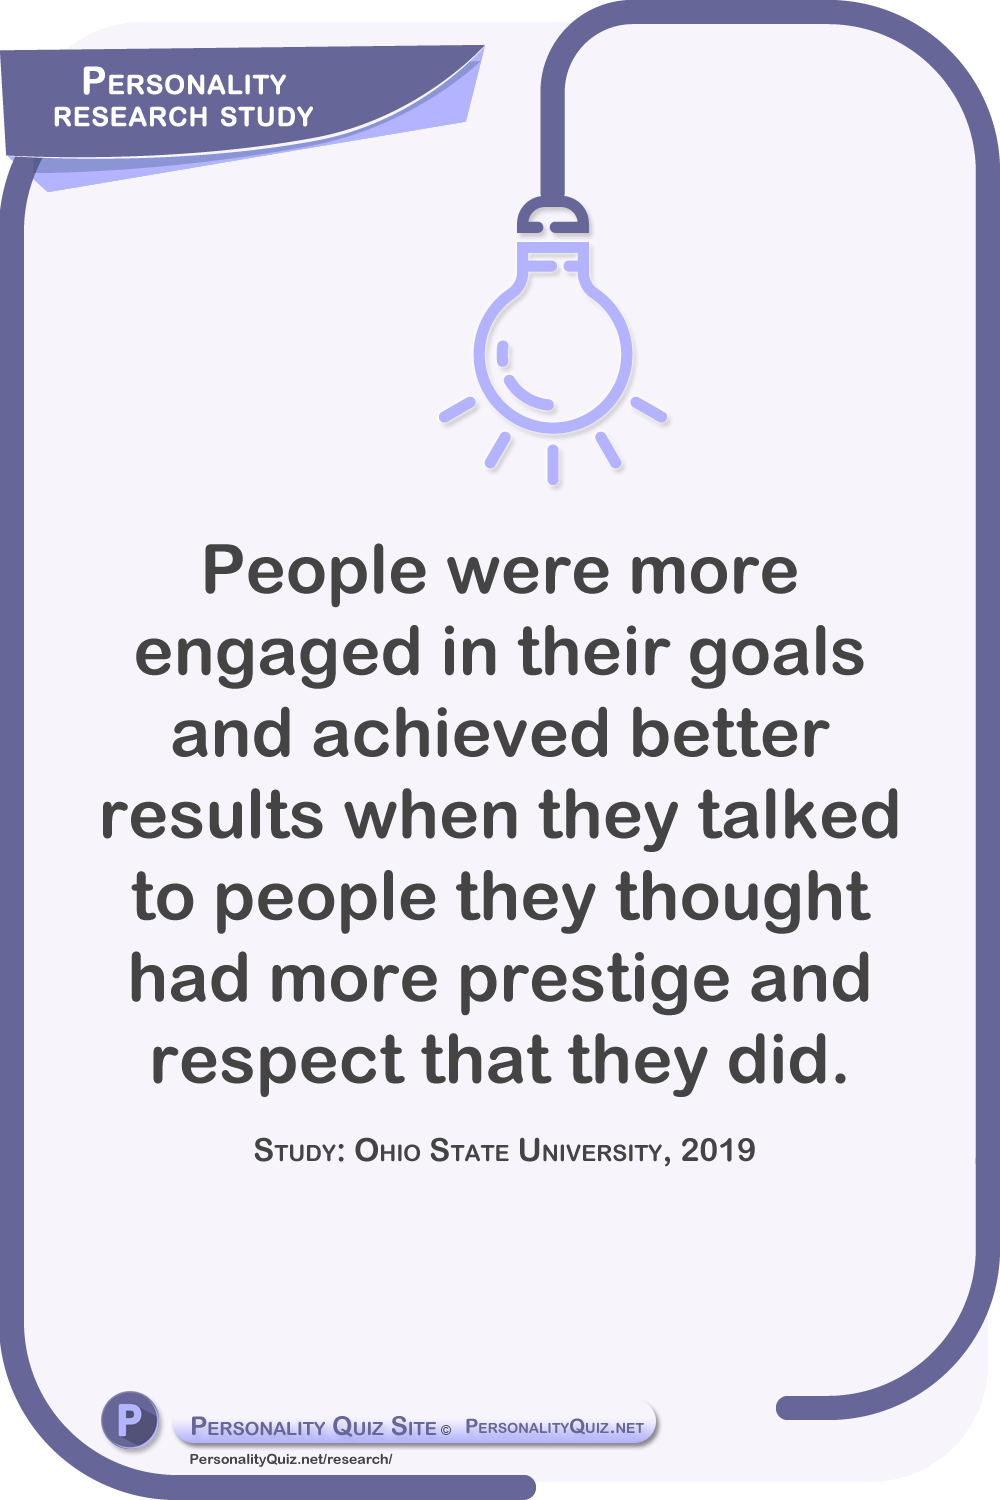 People were more engaged in their goals and achieved better results when they talked to people they thought had more prestige and respect that they did. Study:Ohio State University, 2019